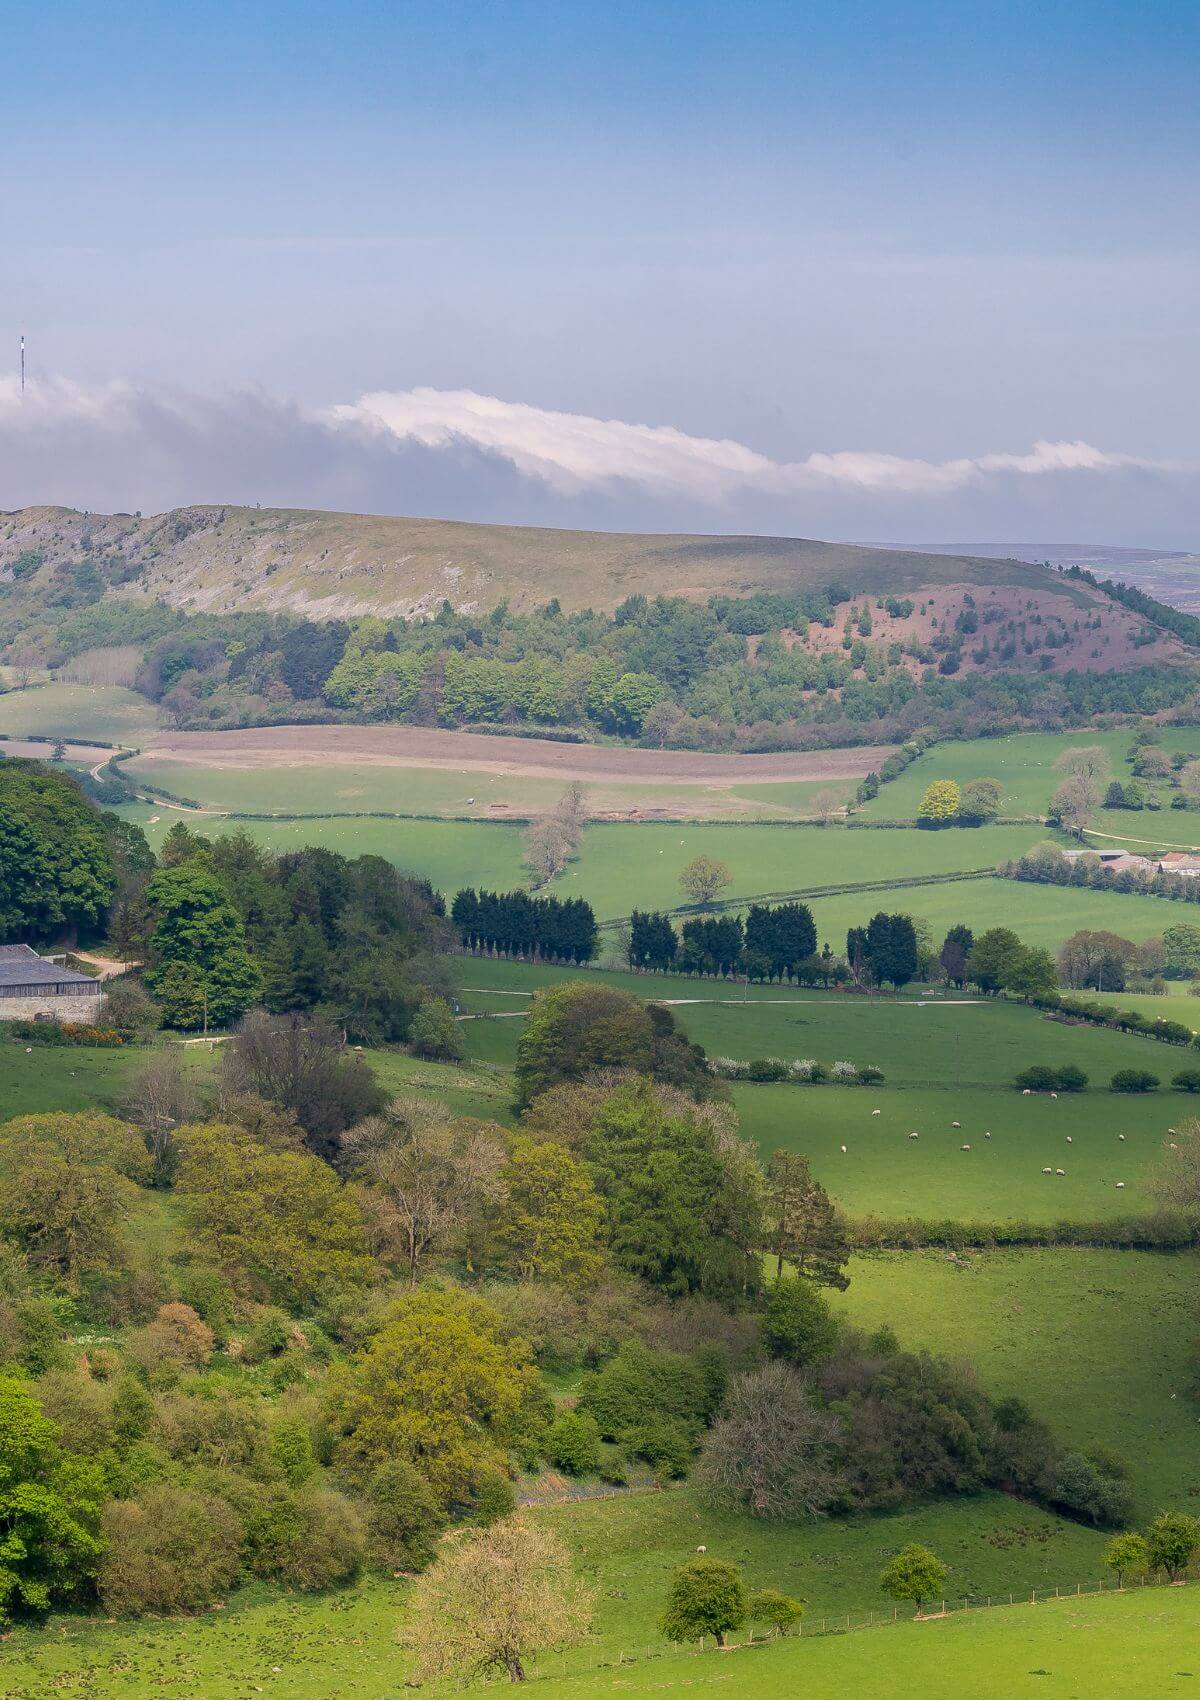 Day trip to the North York Moors from Bradford